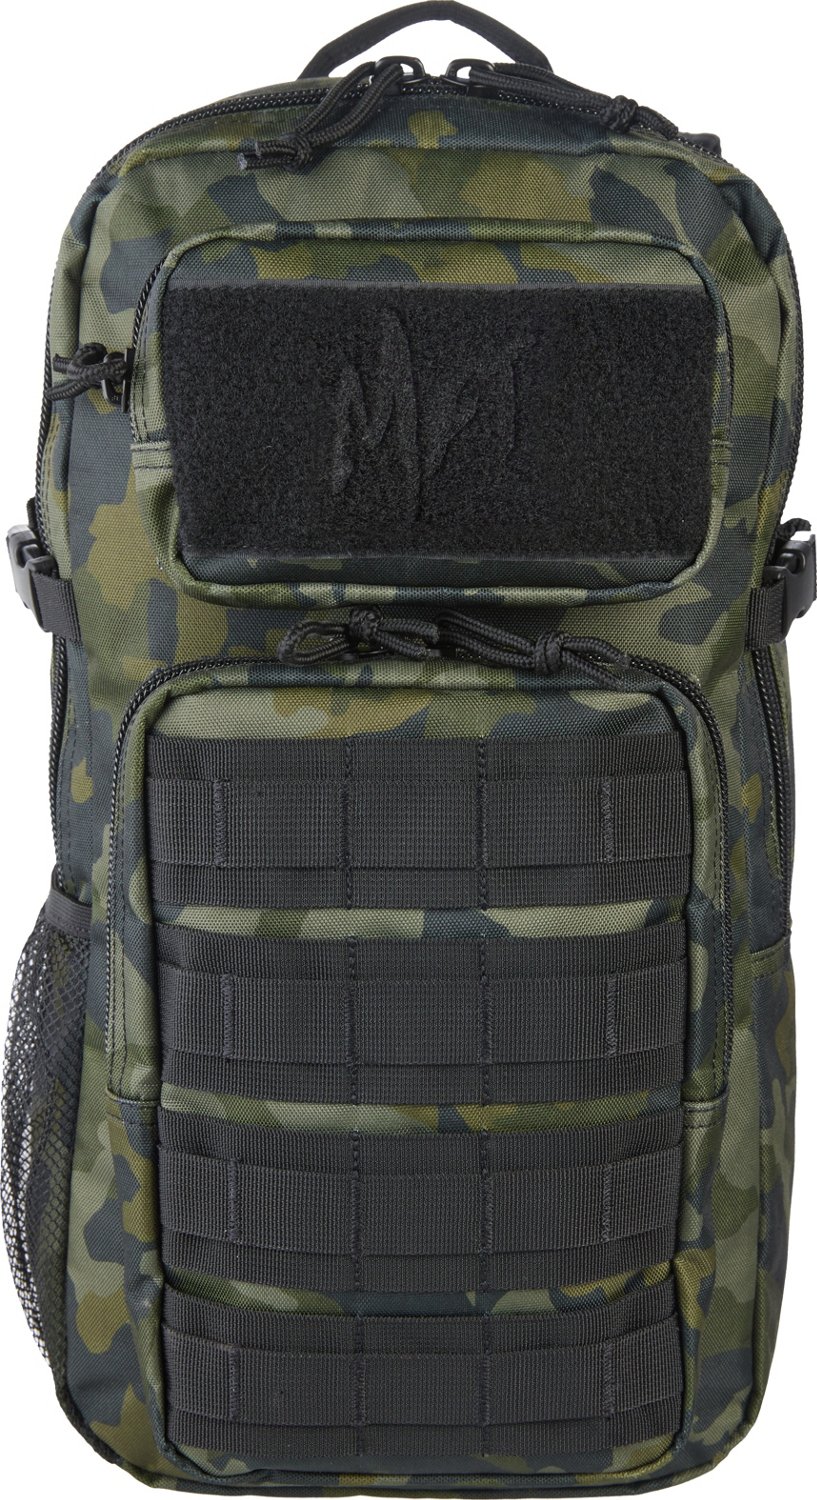 Mission First Tactical Backpack Kit | Free Shipping at Academy